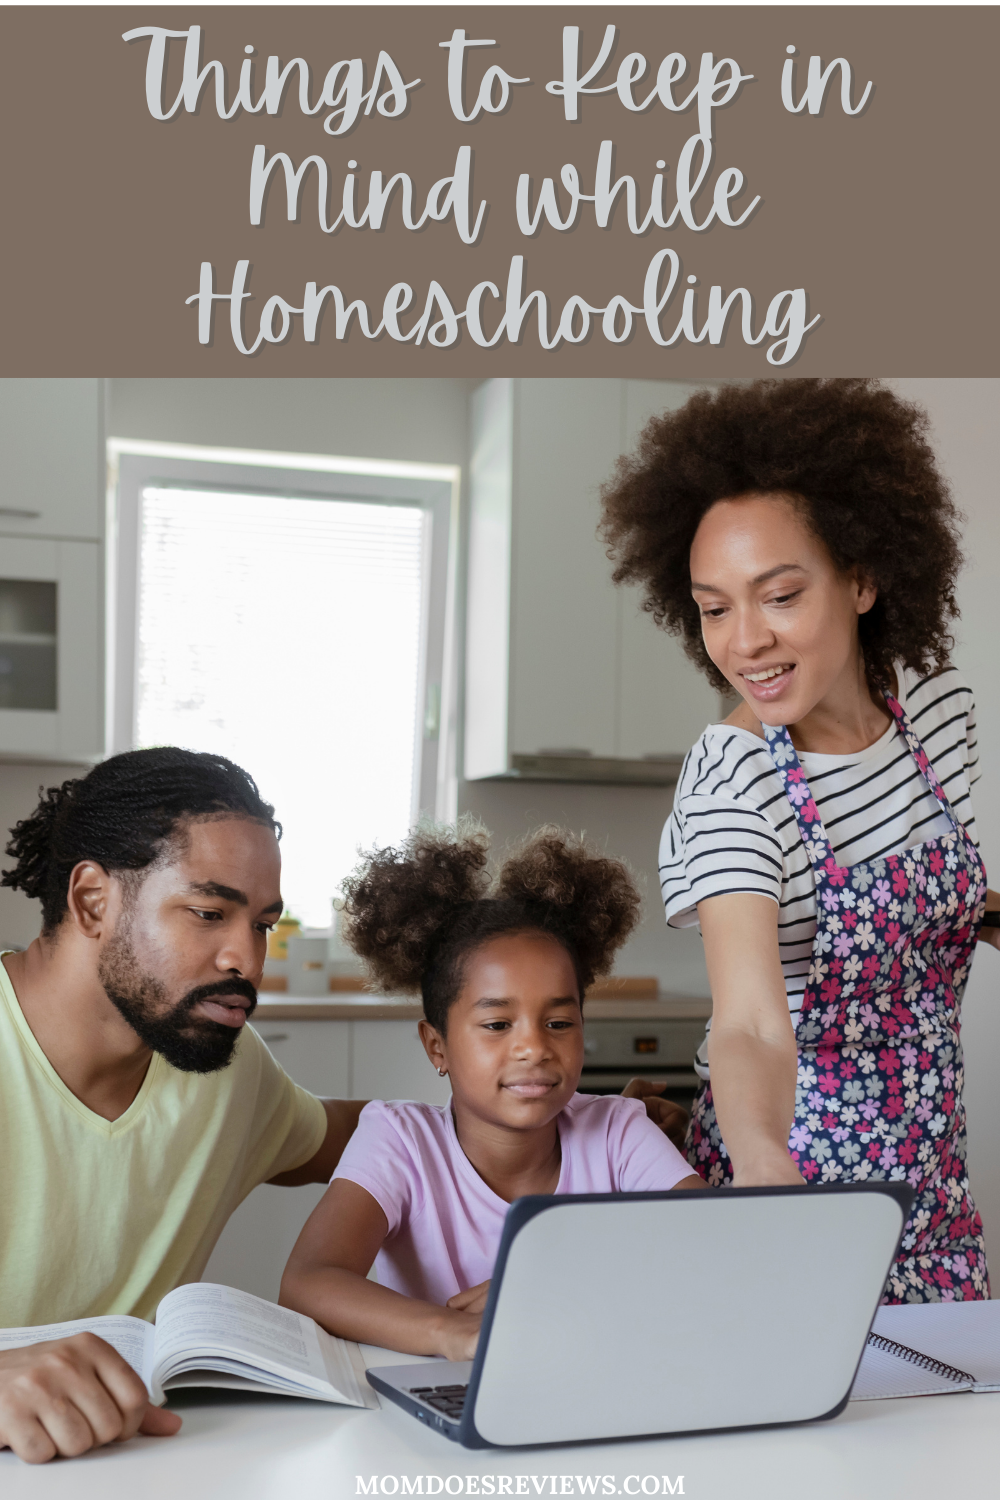 Keeping Your Child Home Schooled During COVID-19? Keep These In Mind